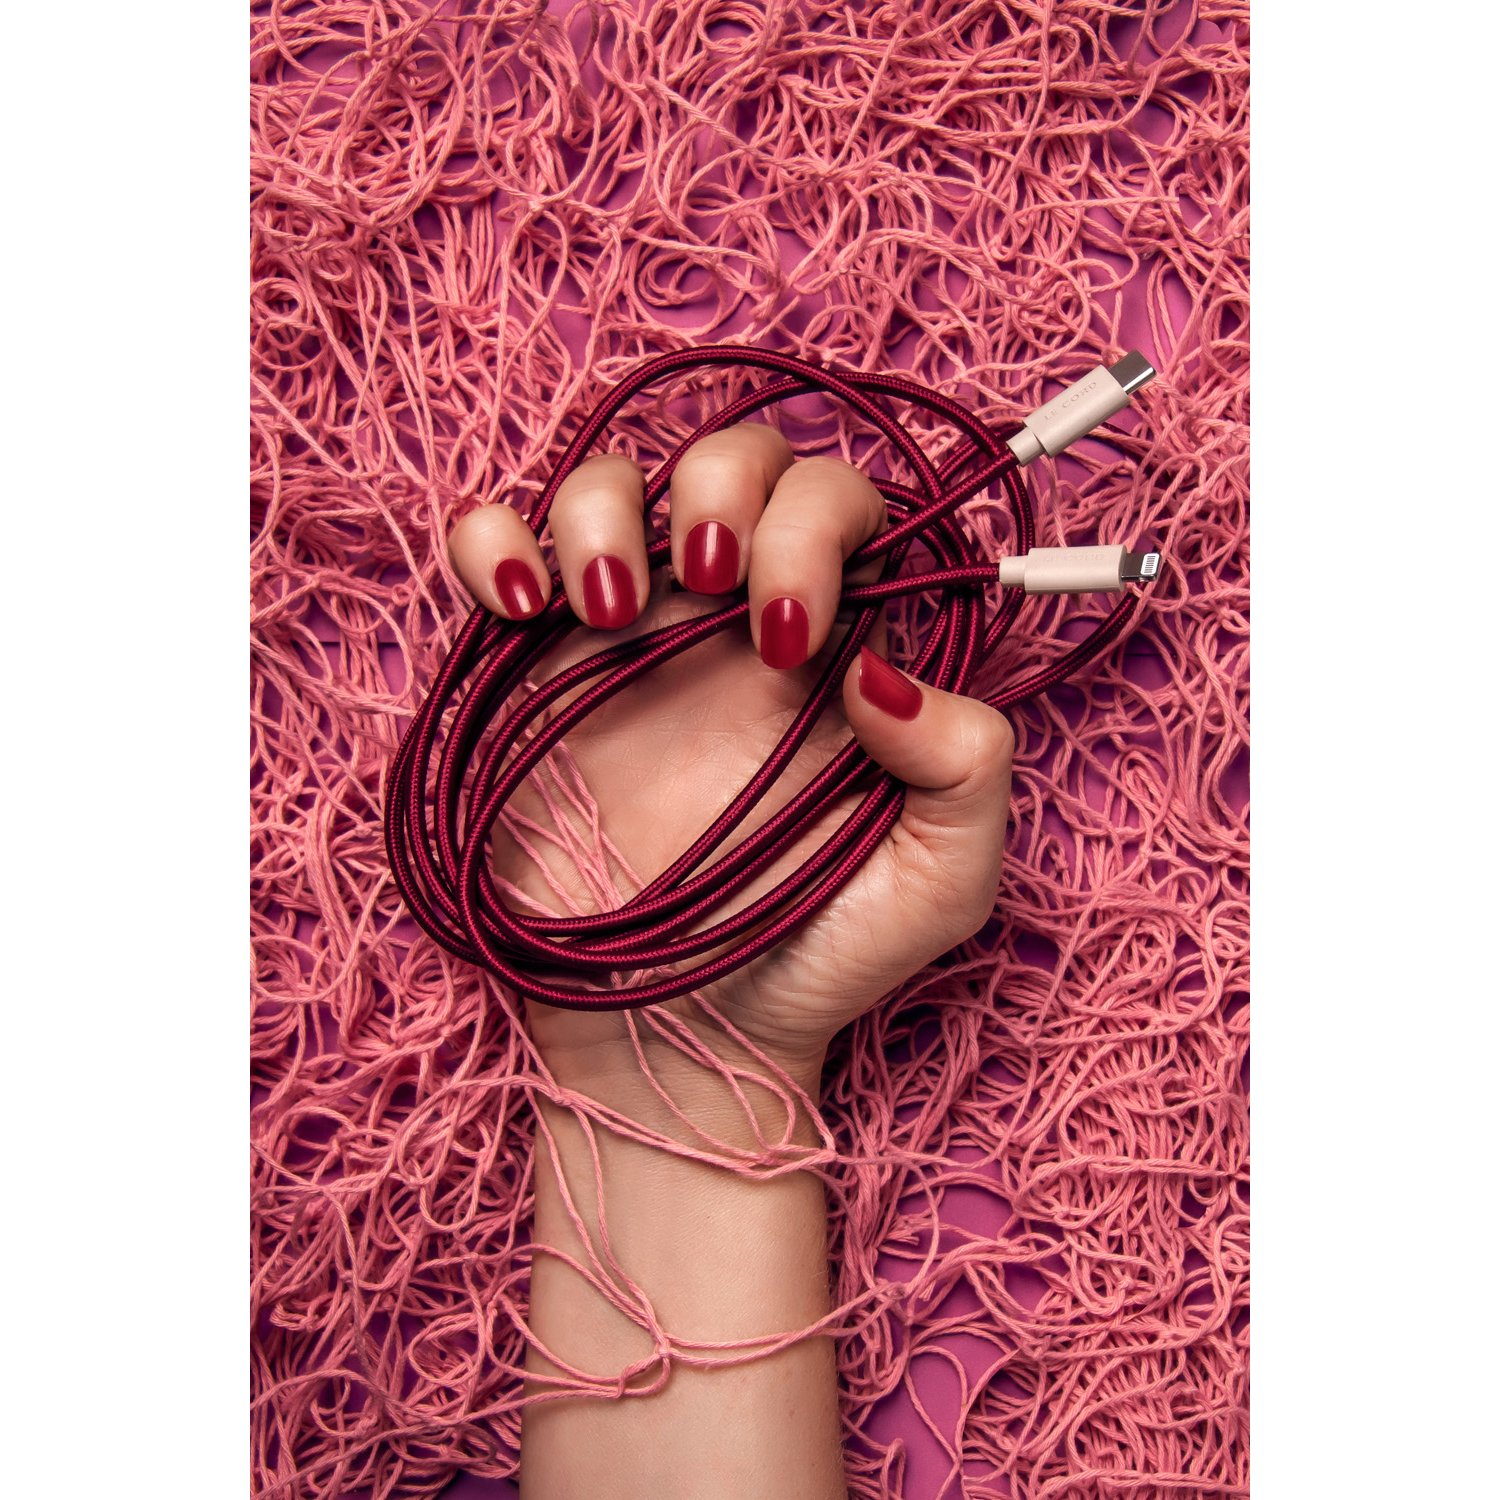 Lightning CORD Kabel recyceltes Plum iPhone LE